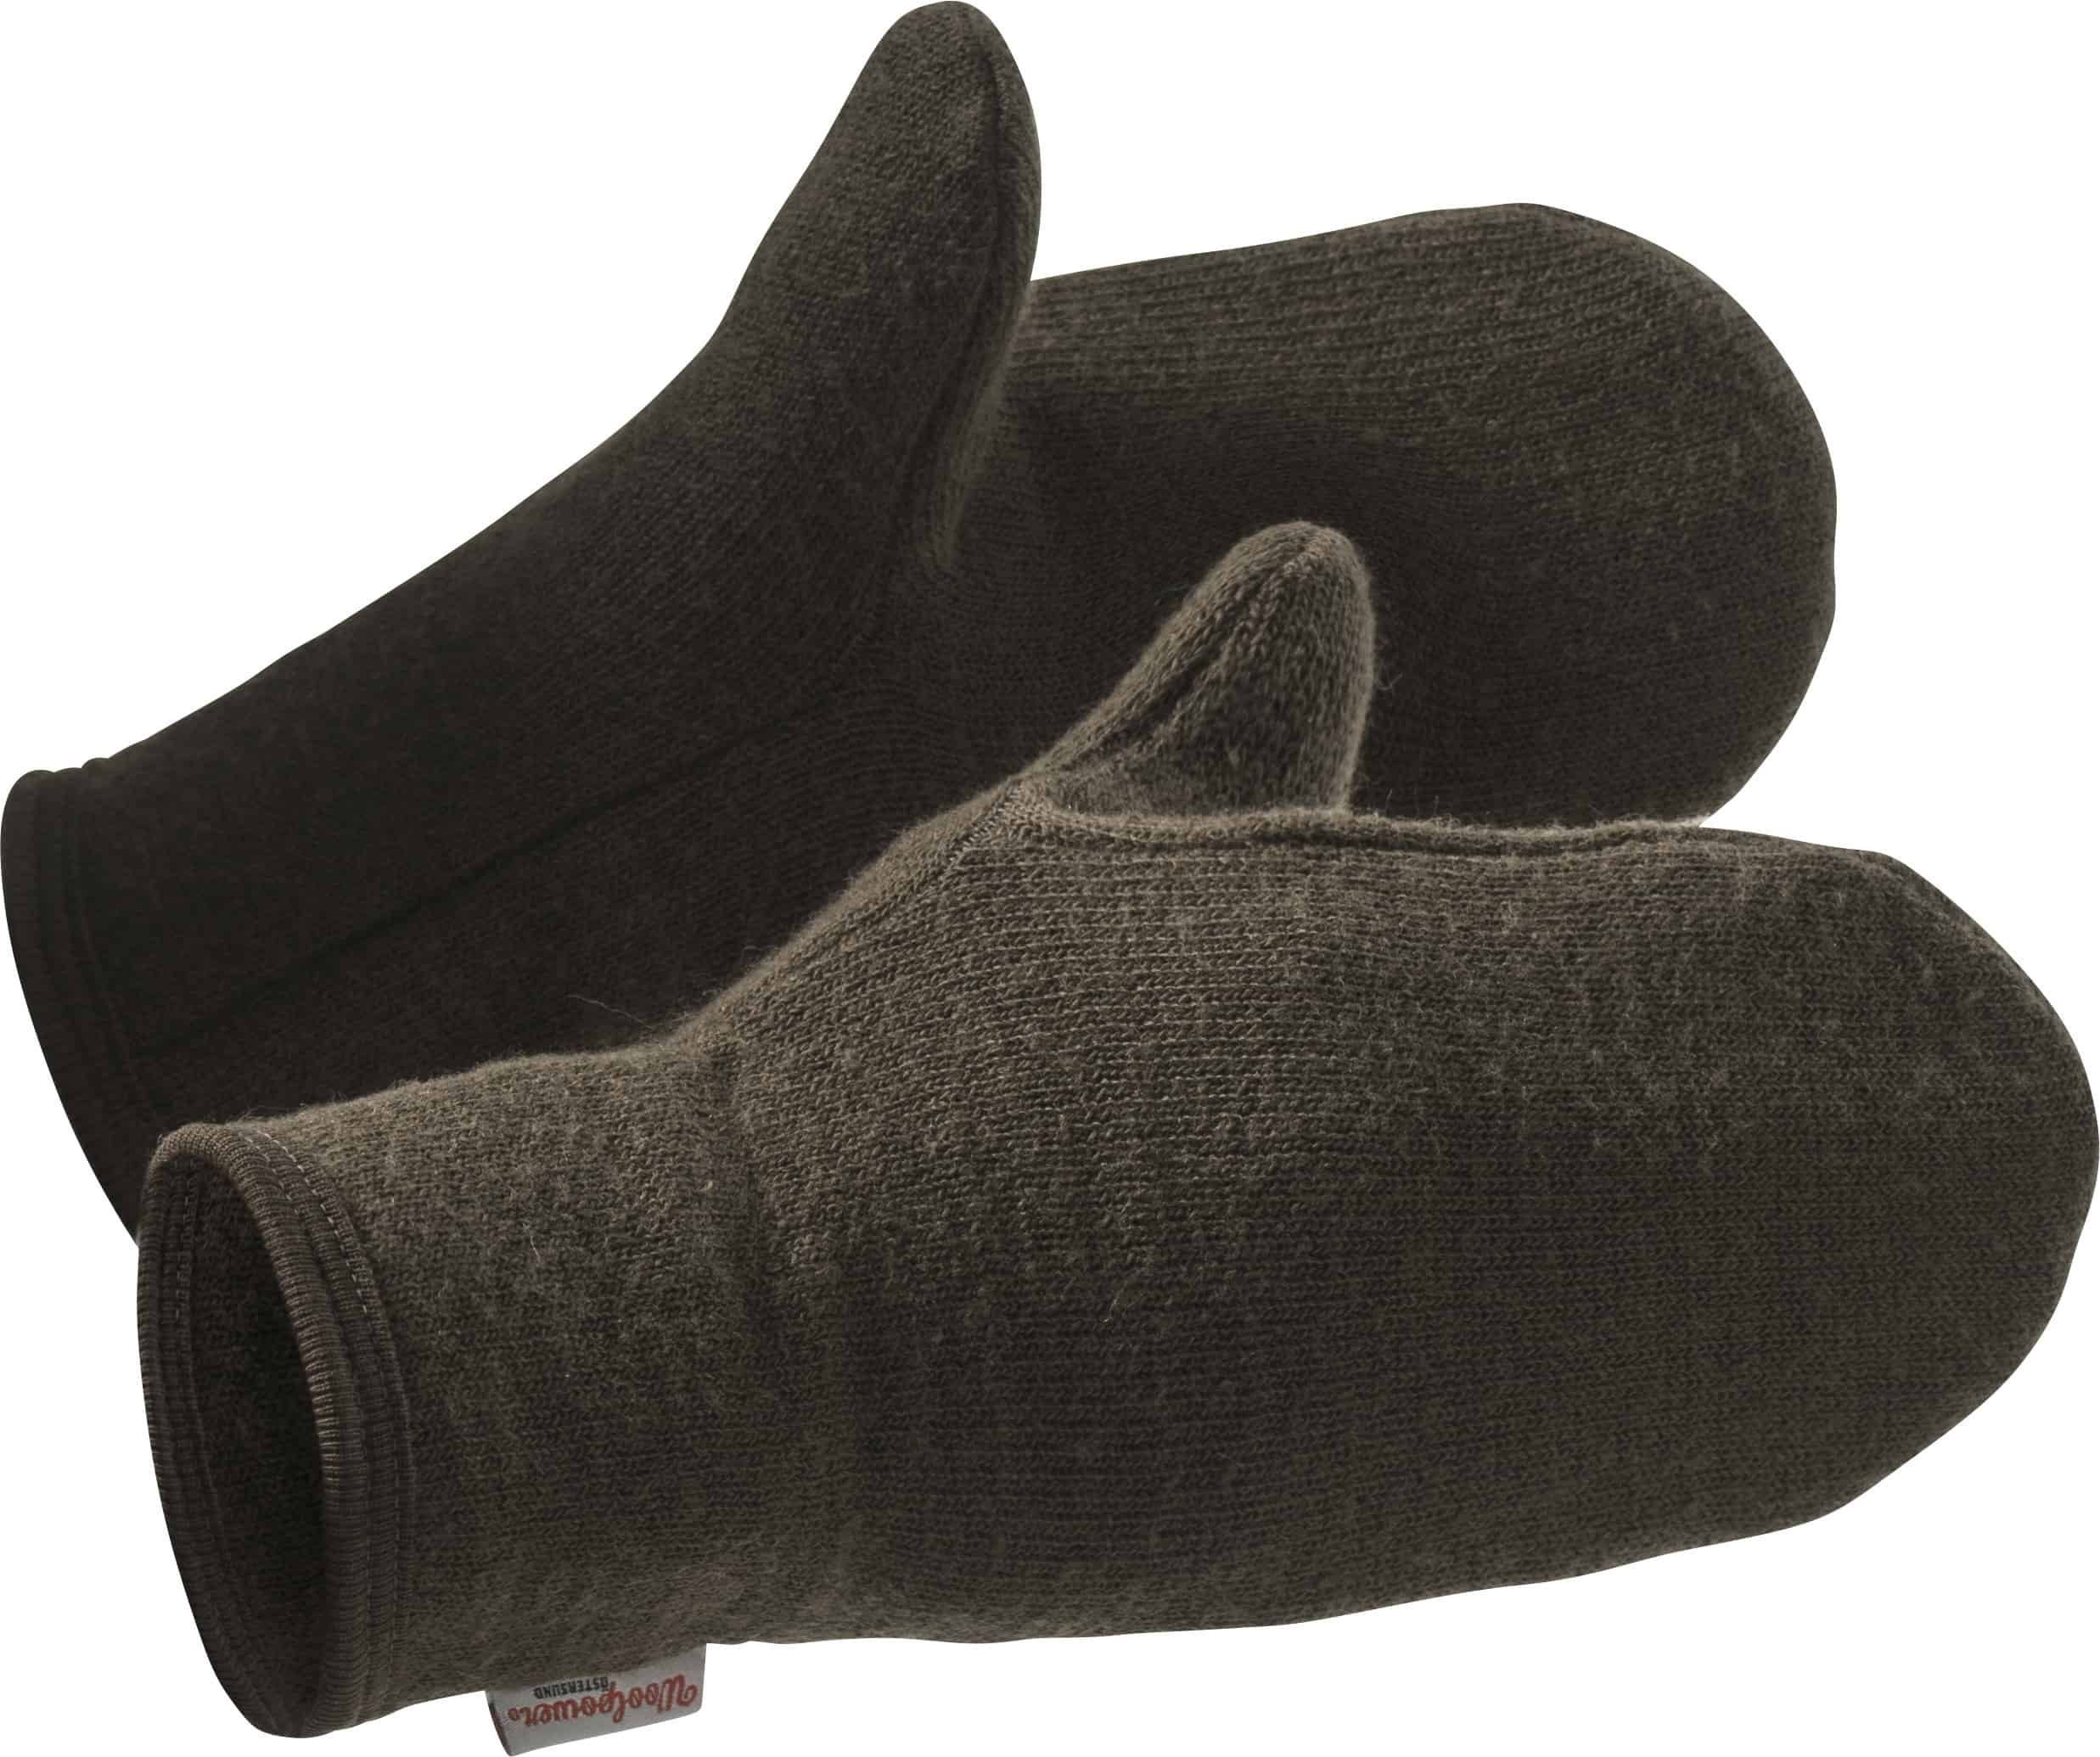 photo of woolpower 9754 mittens 400 in pine green colour